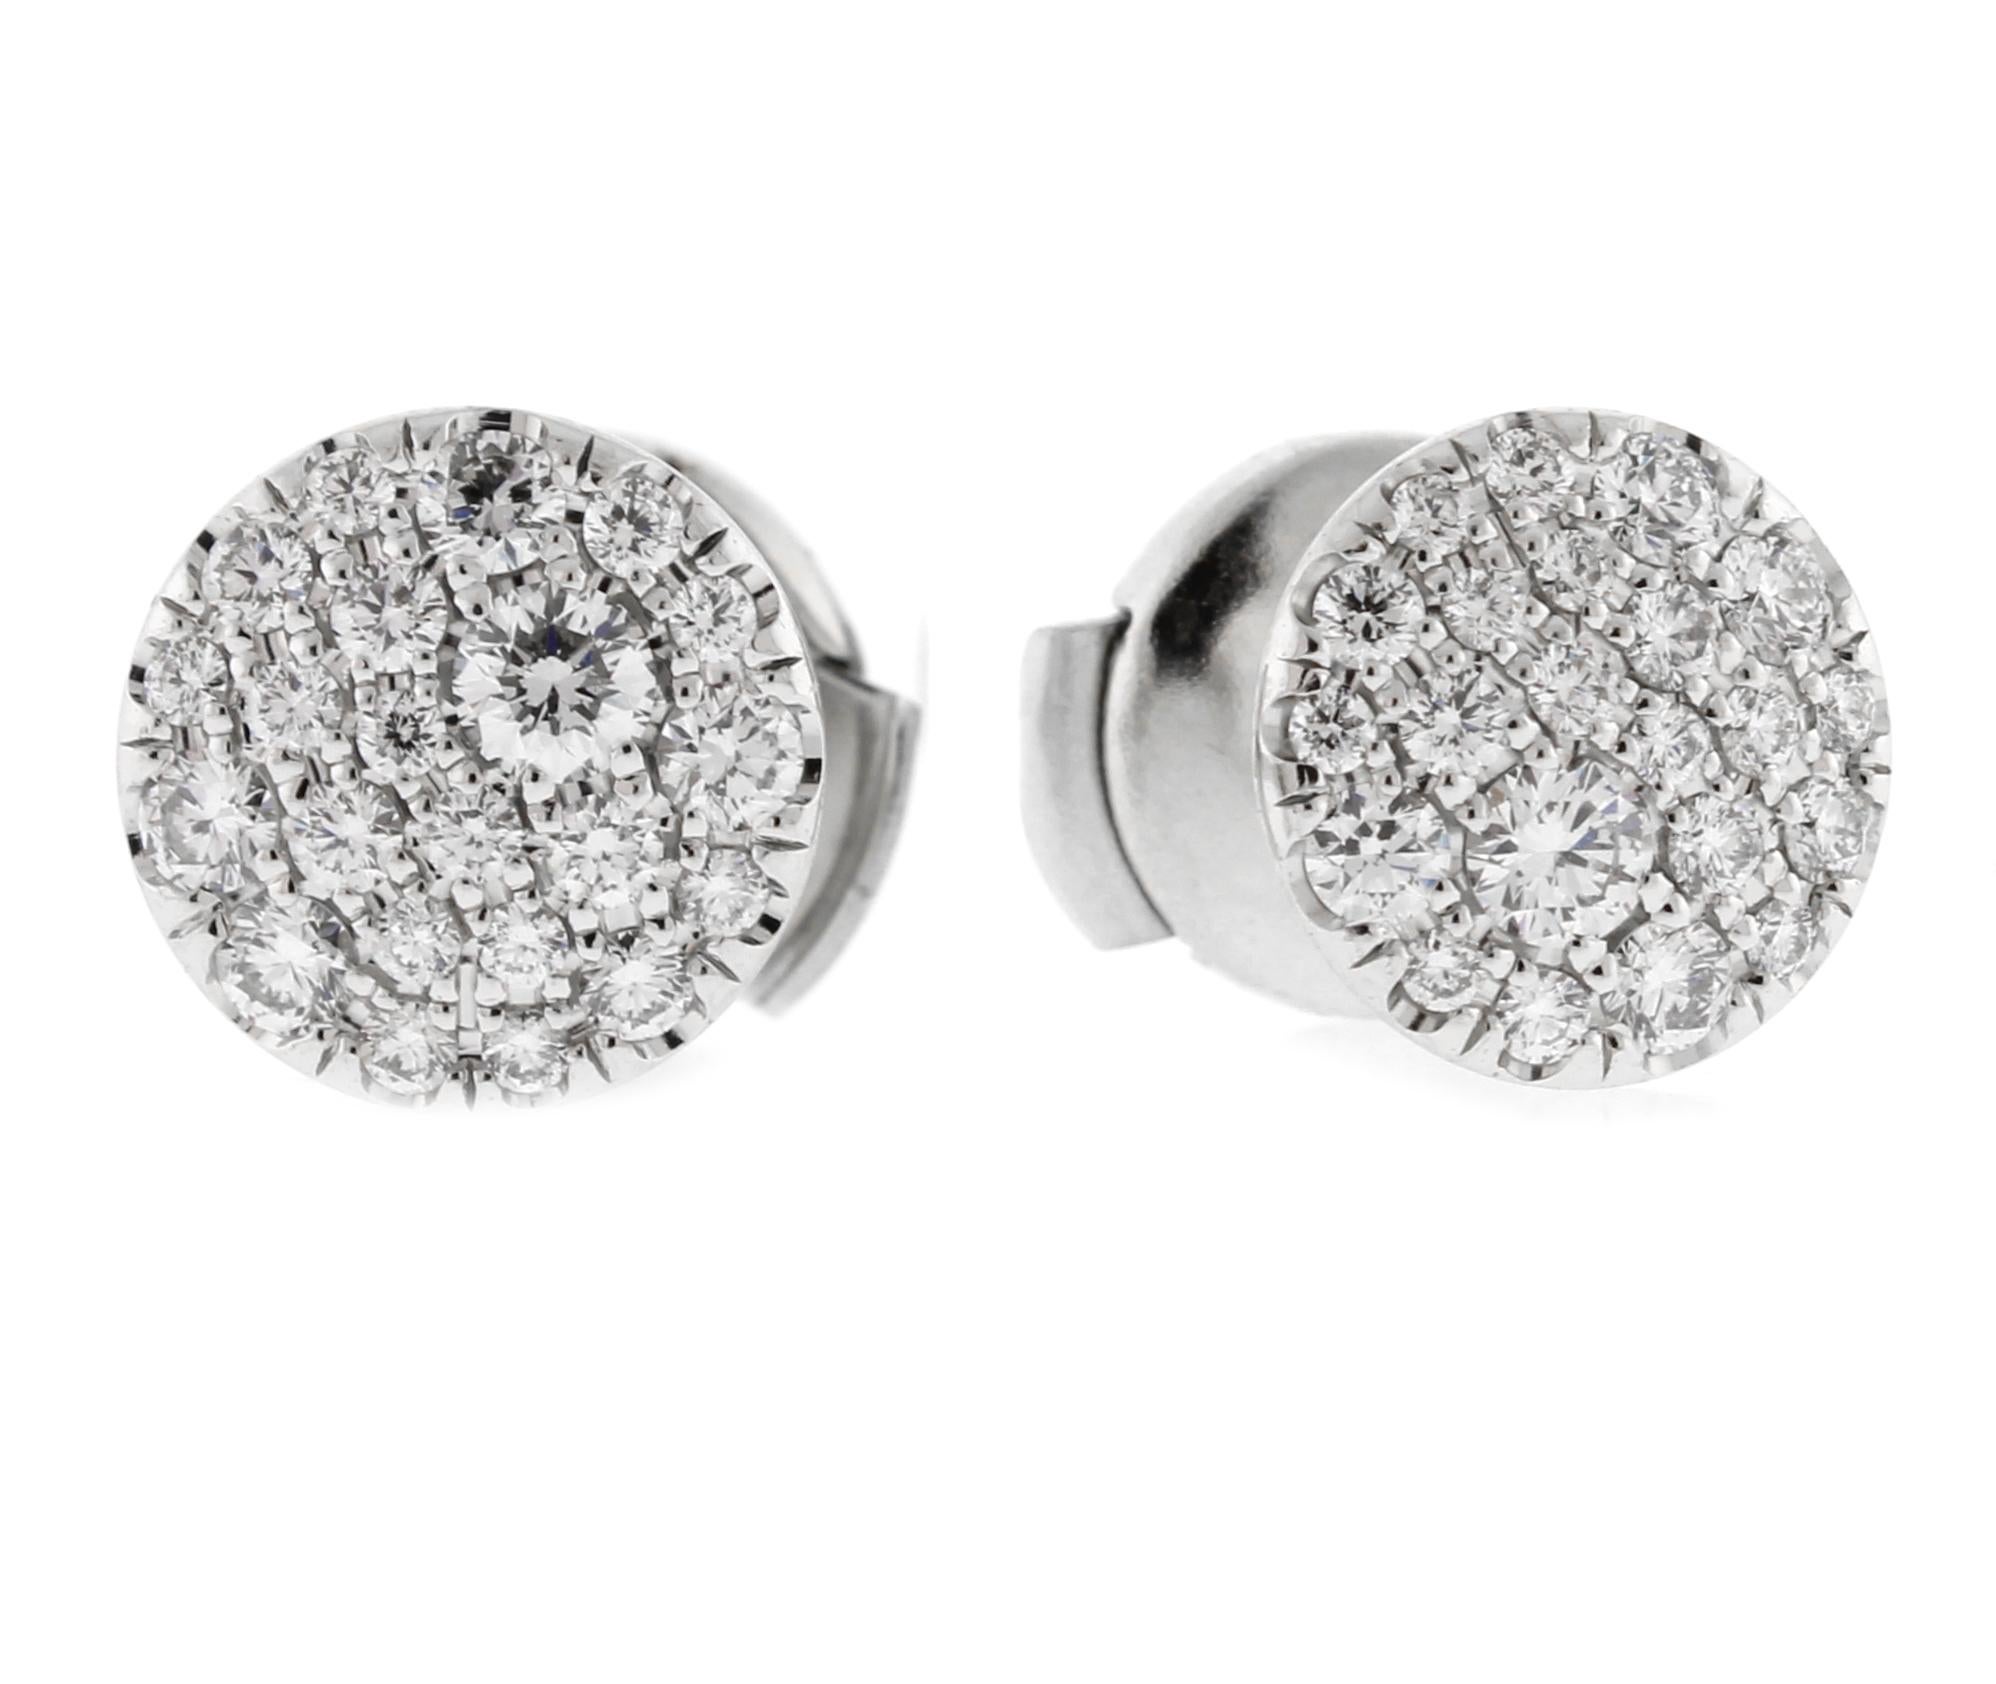 From Tiffany & Co.'s Metro collection, a pair of thier pavé diamond stud earrings
♦ Designer: Tiffany & Co.
♦ Diamonds weigh .37 carats F VS1+
♦ Gem stone: Amethyst 16 X 12
♦  8mm diameter 
♦ Tiffany locking earring back 
♦  Tiffany pouch